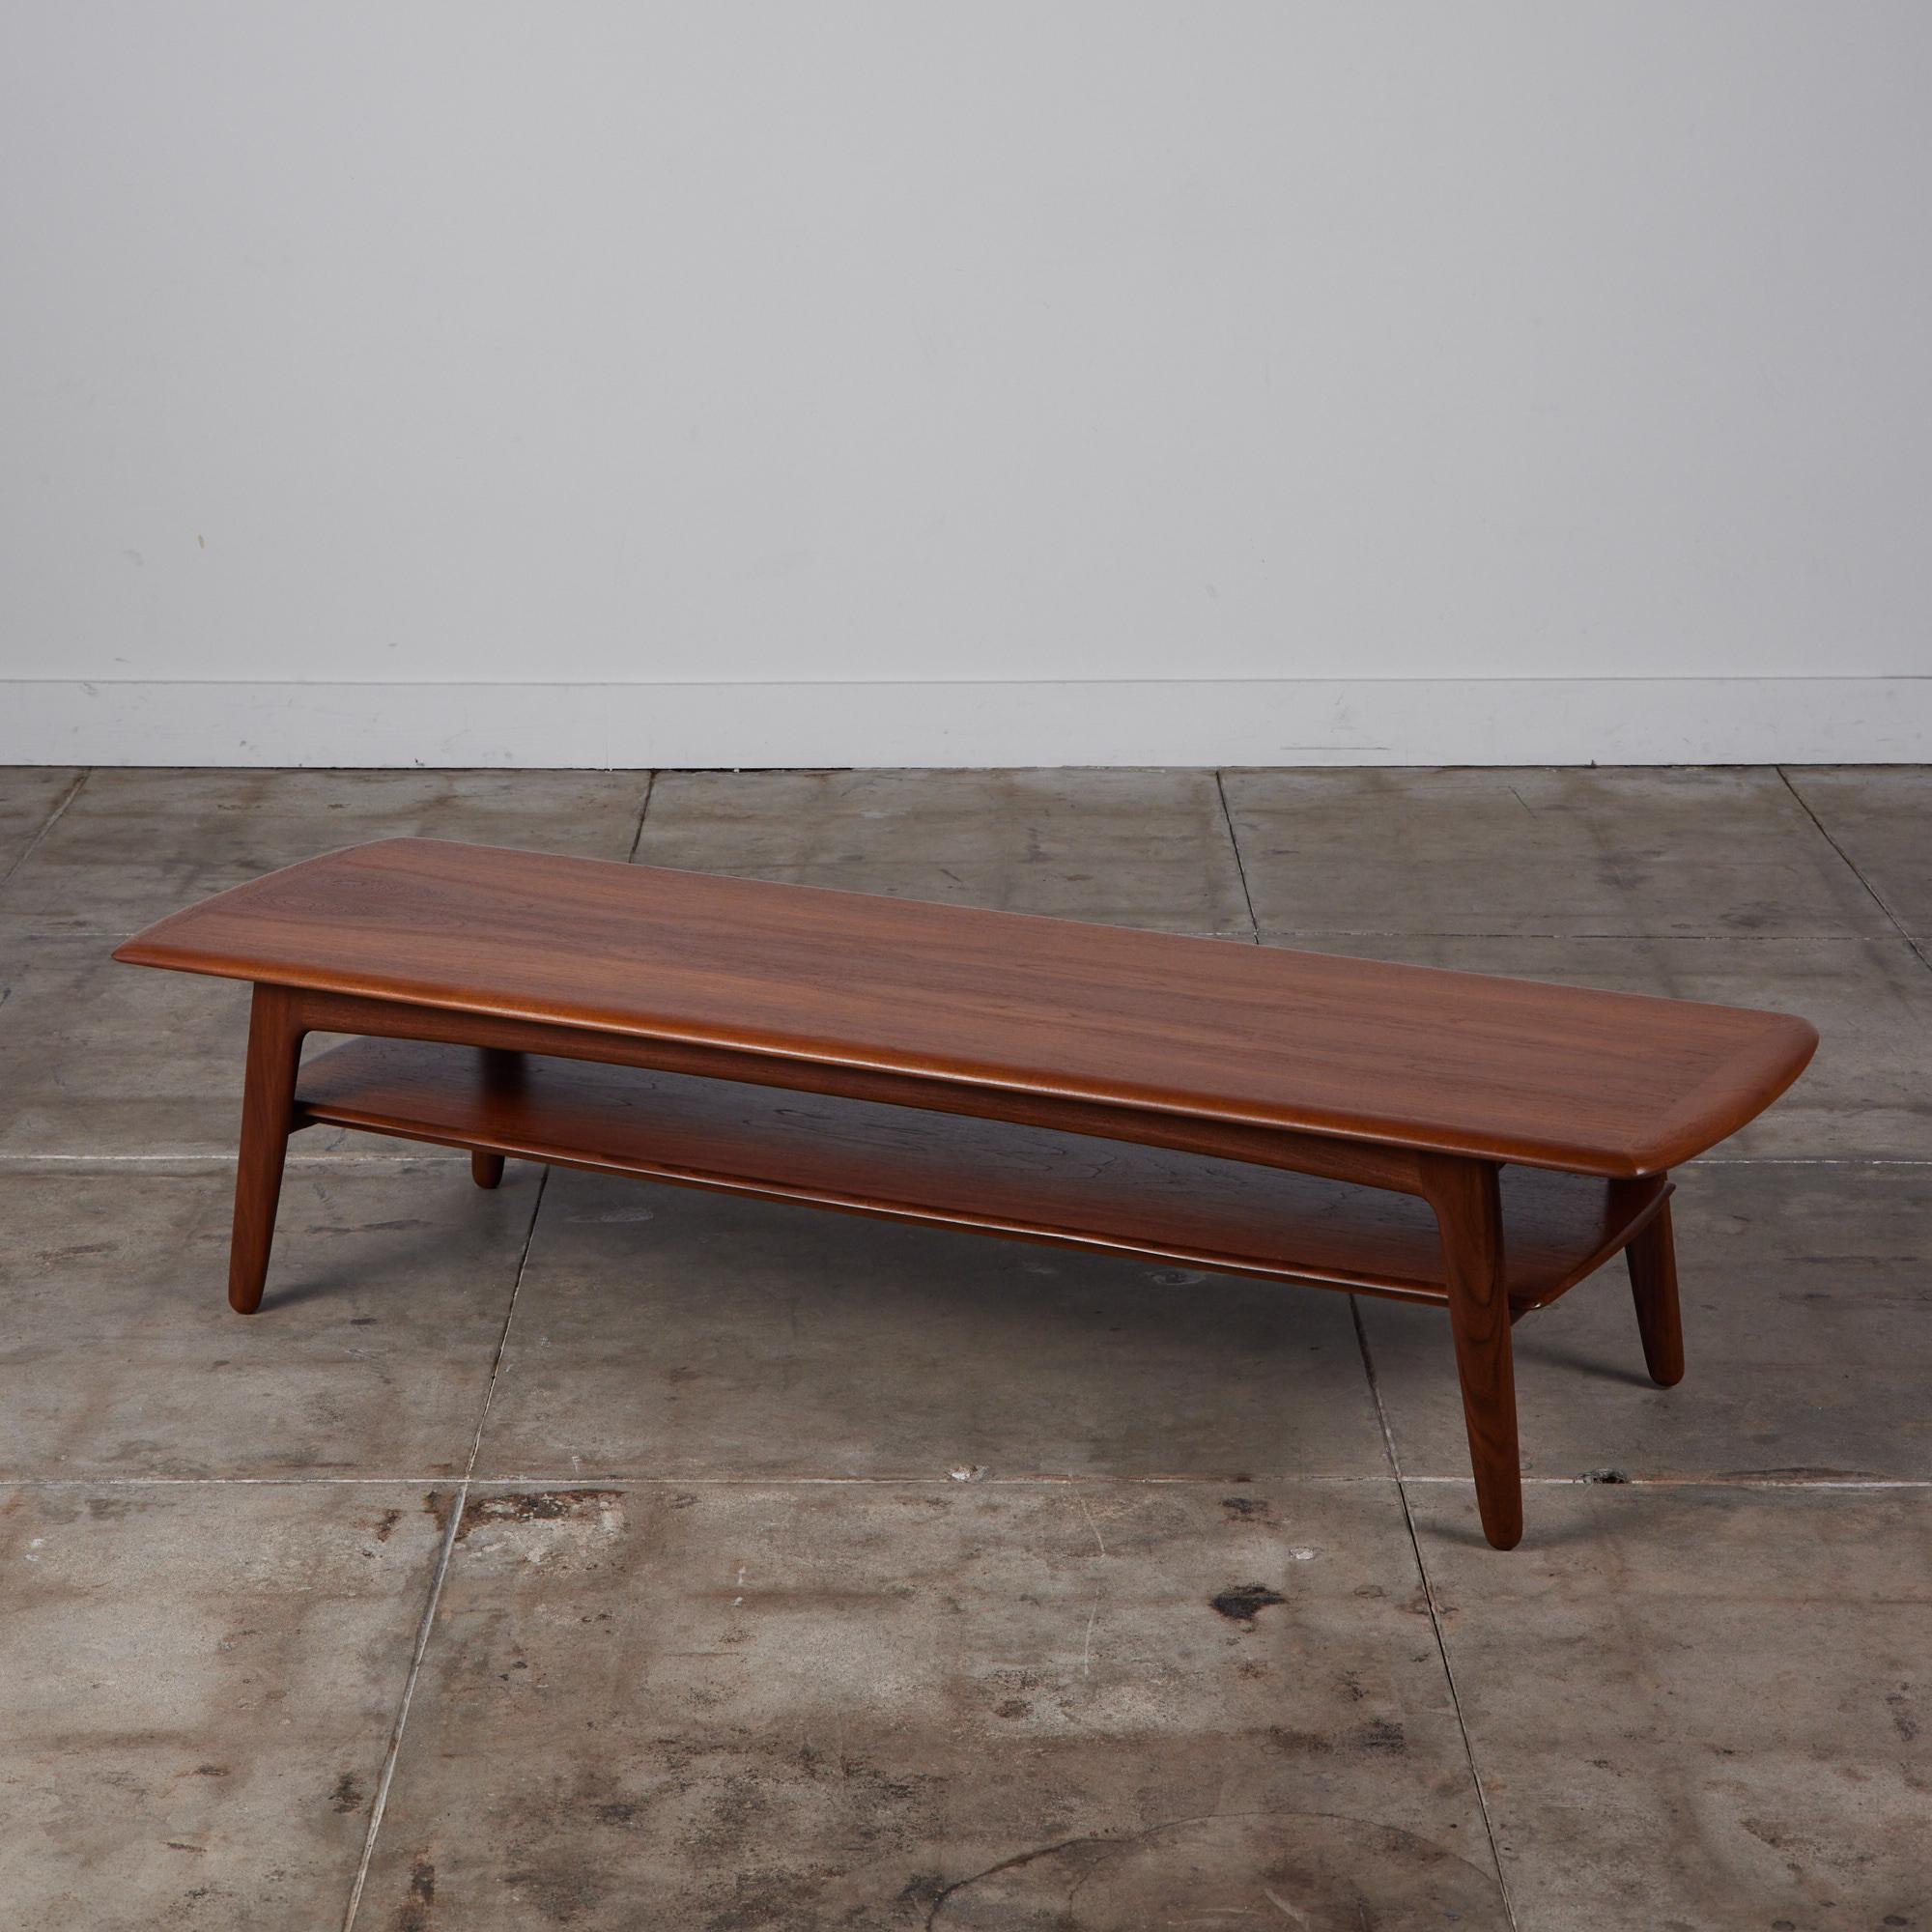 Rectangular coffee table by Svend A. Madsen for Karl Lindegaard, c.1960s, Denmark. The long teak coffee table has slightly rounded corners and is supported by splayed legs. The table boasts a lower shelf to discreetly display magazines or